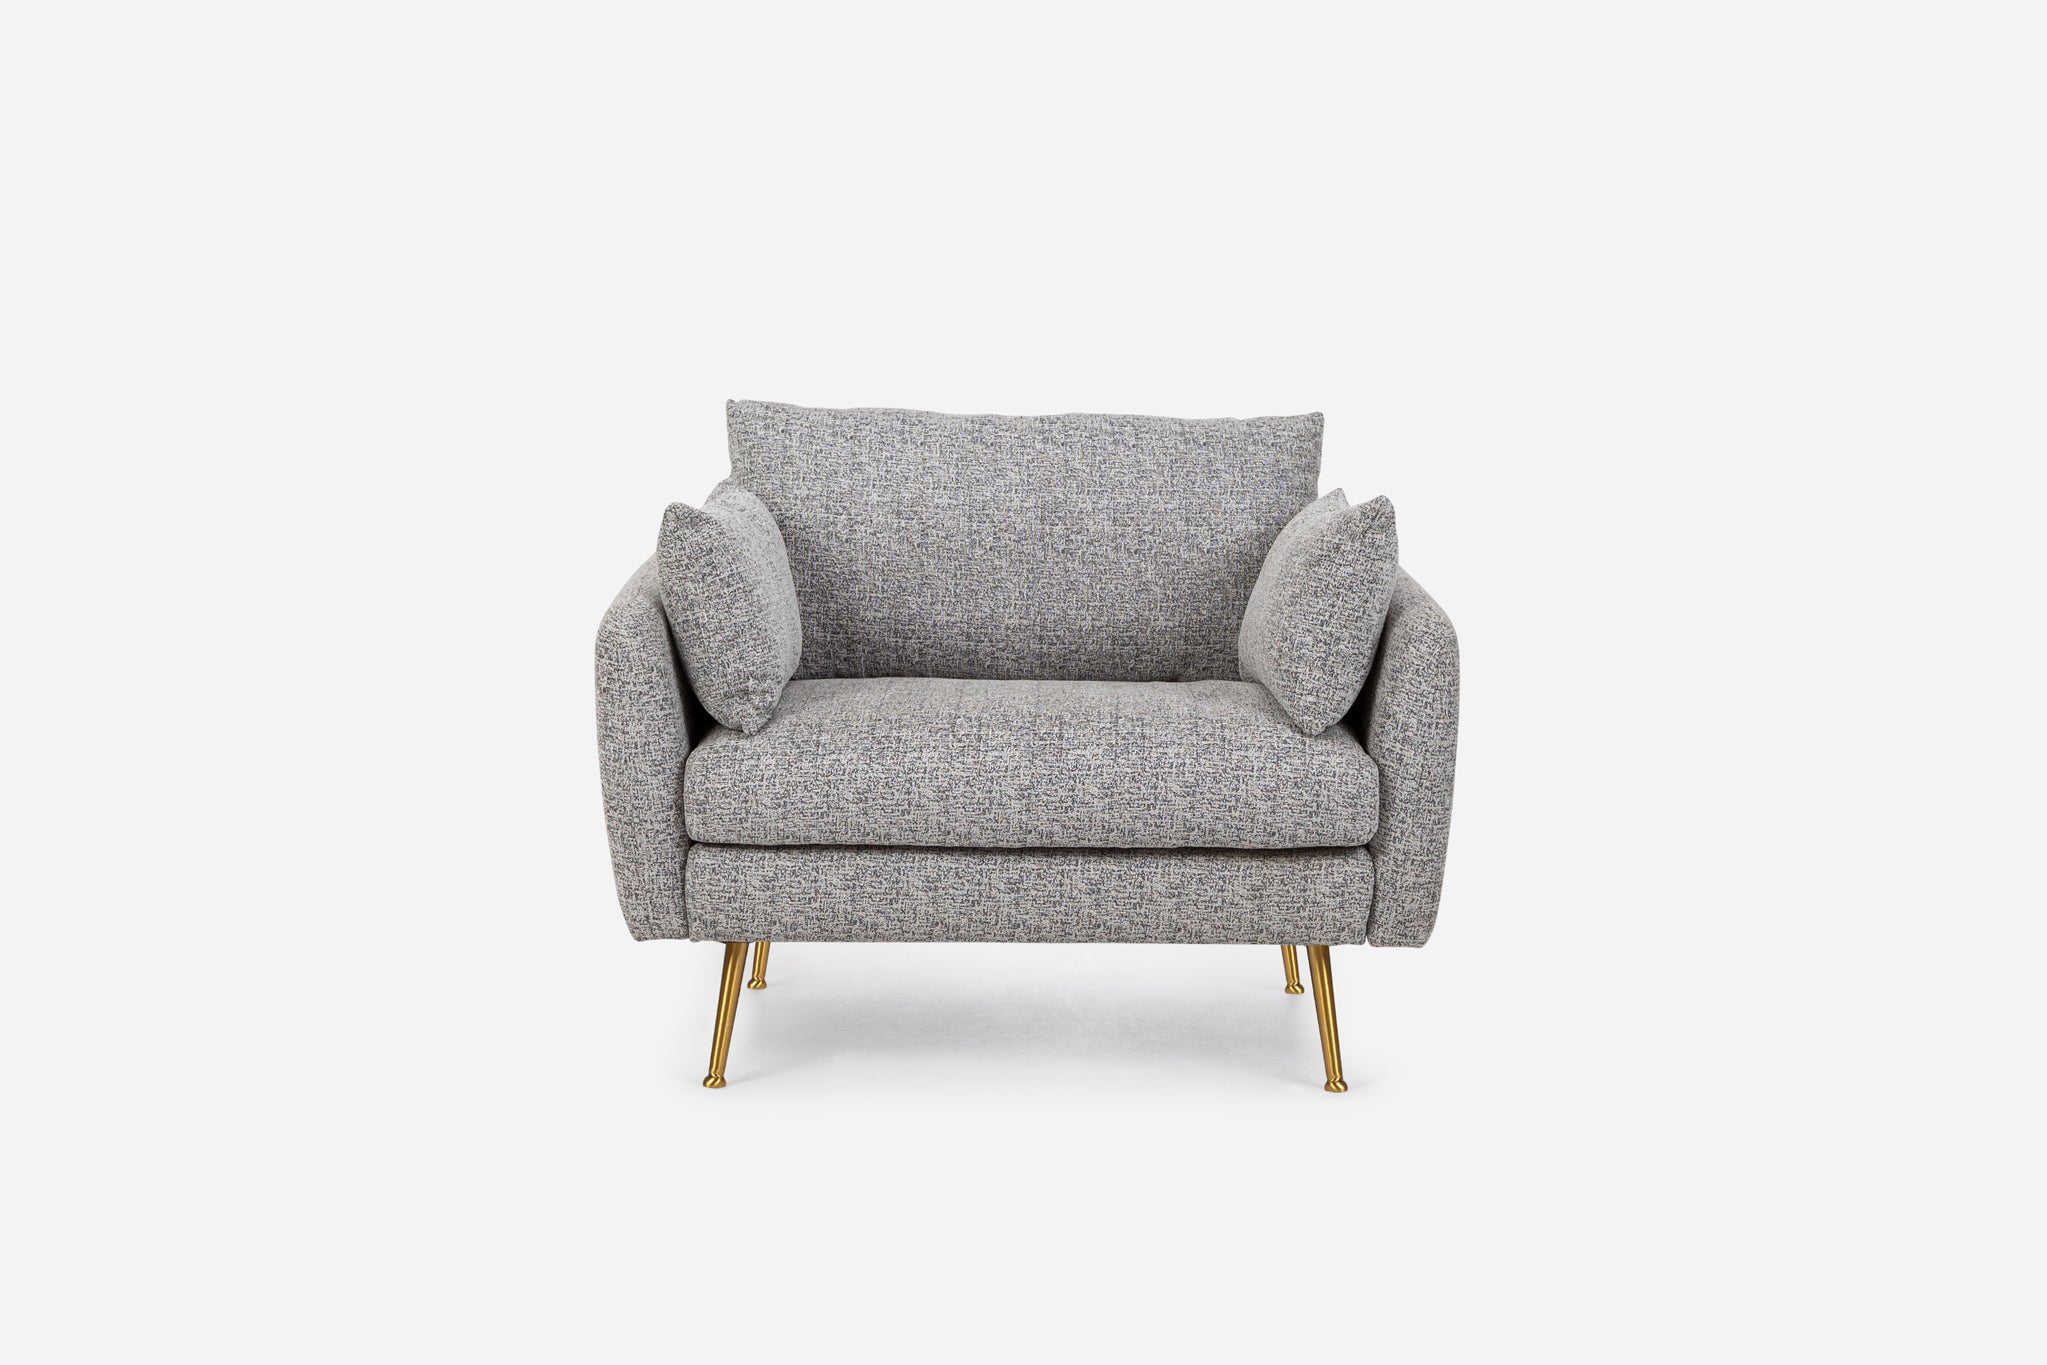 park armchair shown in grey fabric with gold legs